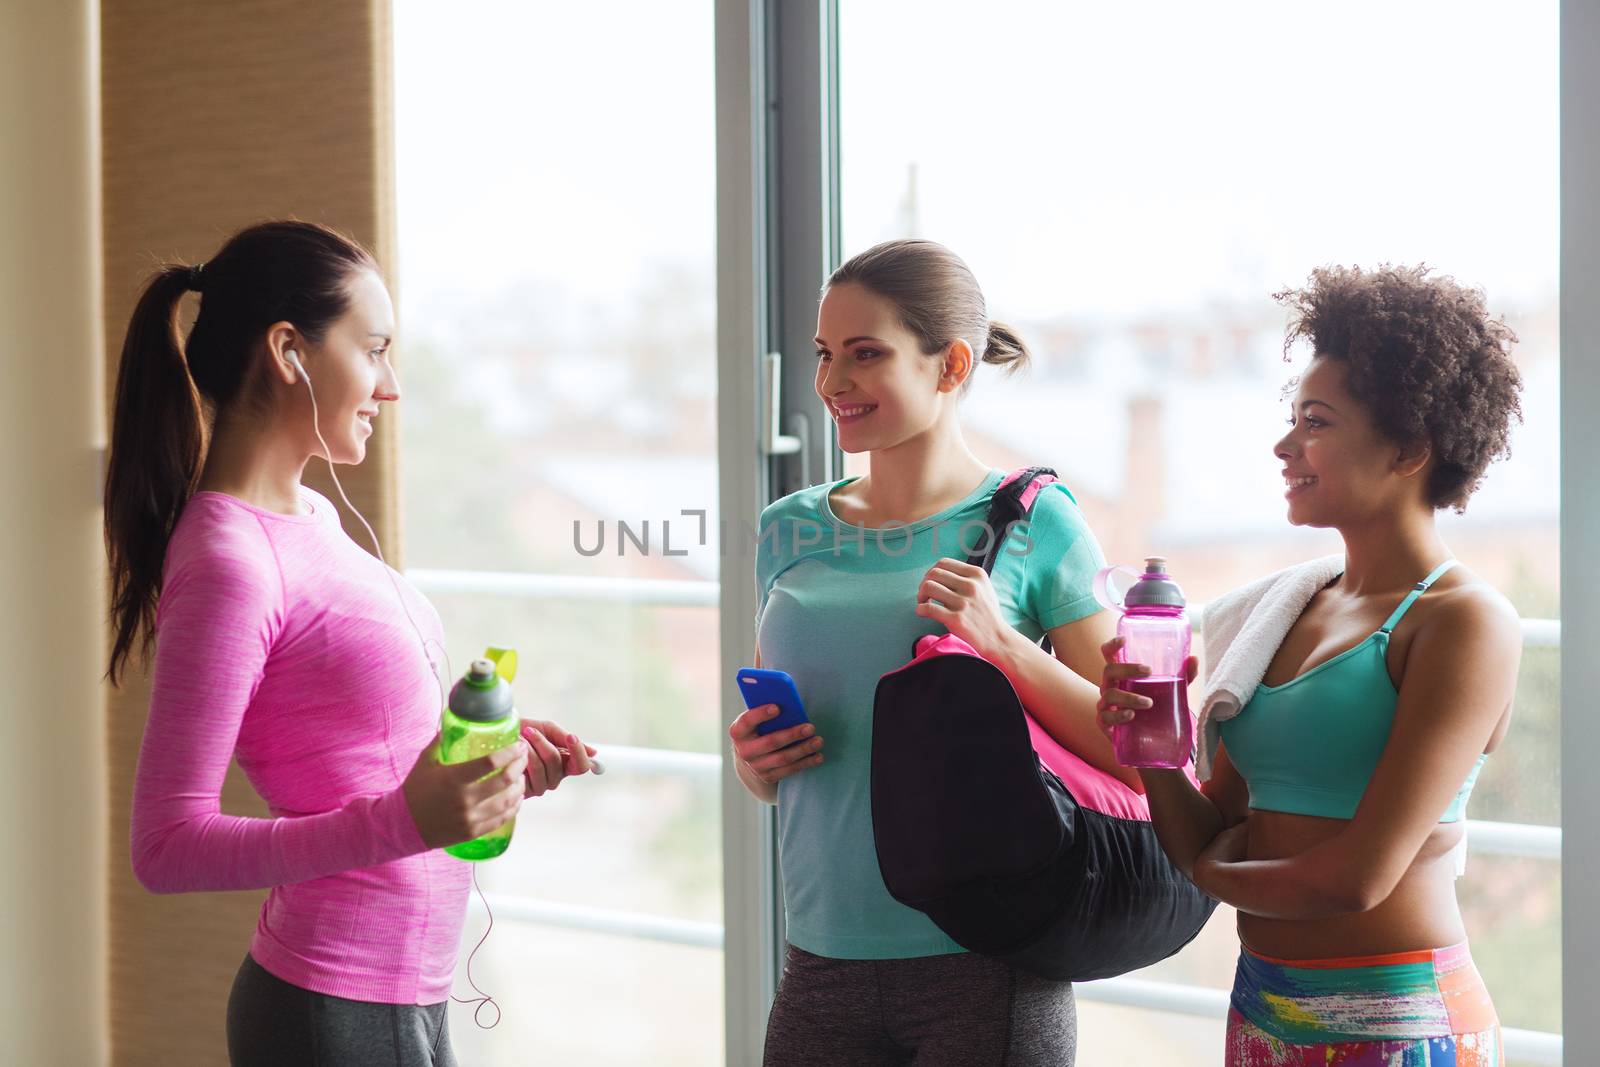 fitness, sport, training and lifestyle concept - group of happy women with bottles of water, smartphone and bag talking in gym